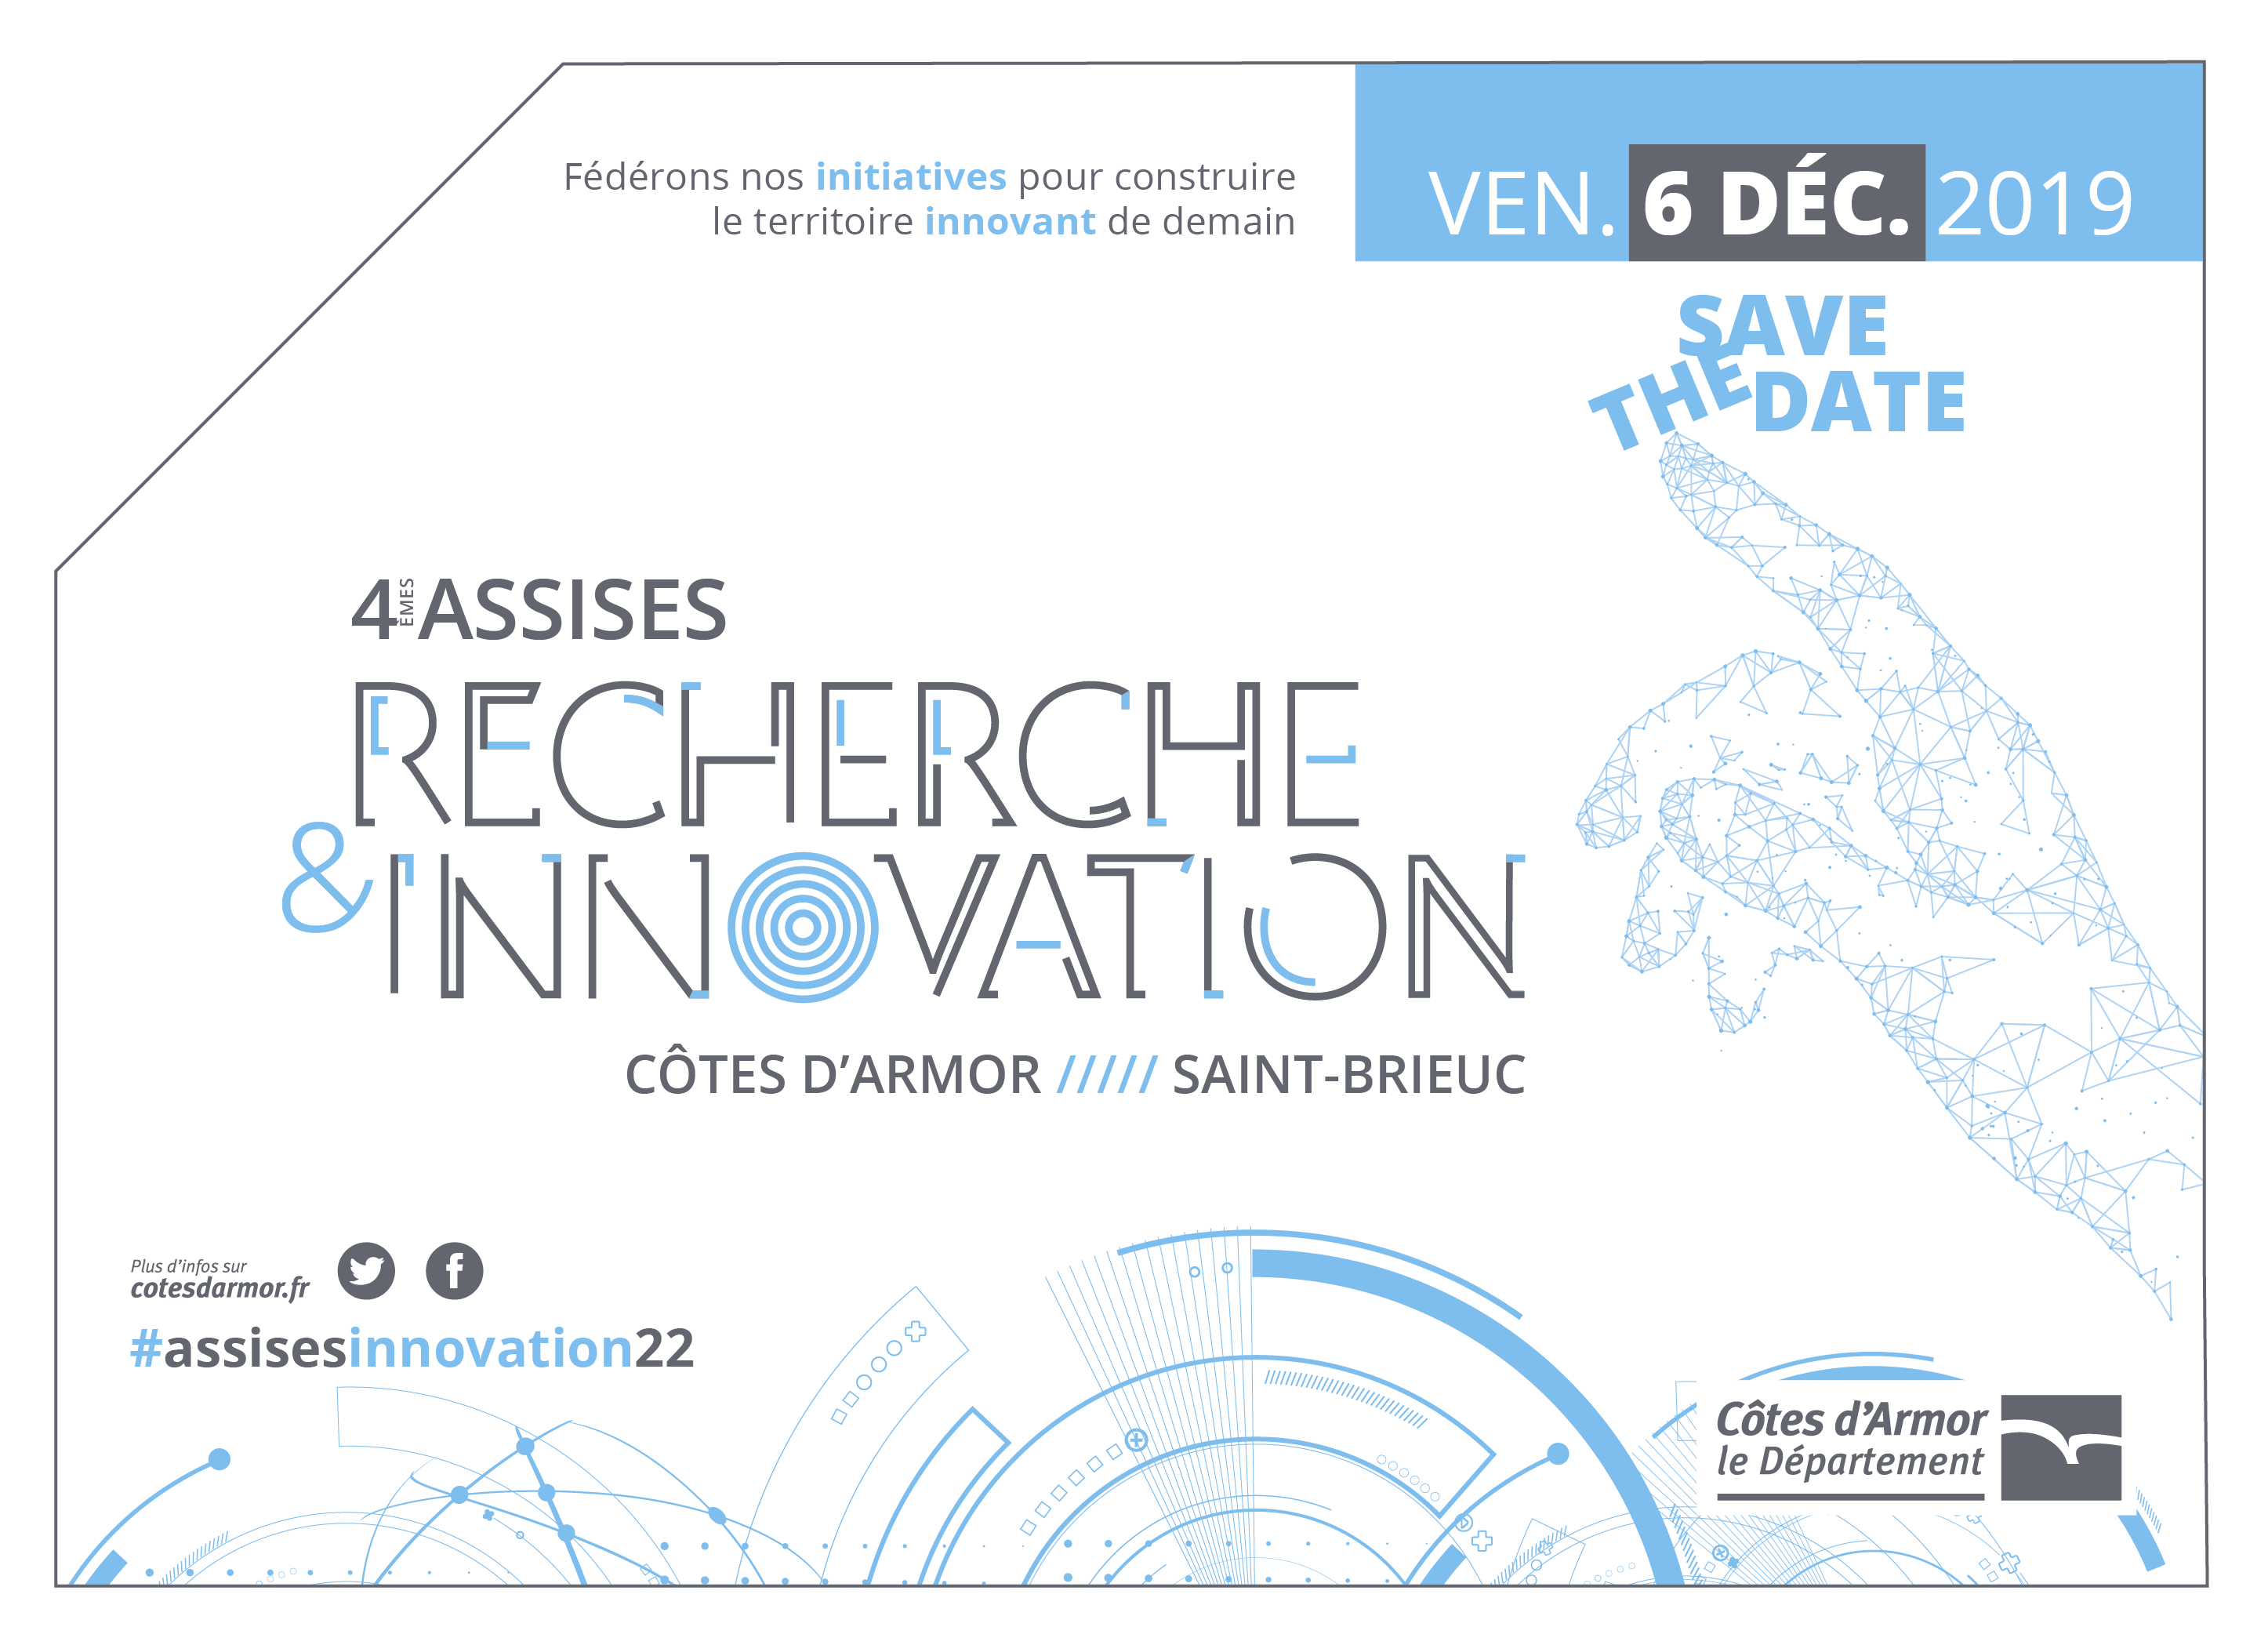 Assises édition 2019 - Save the date